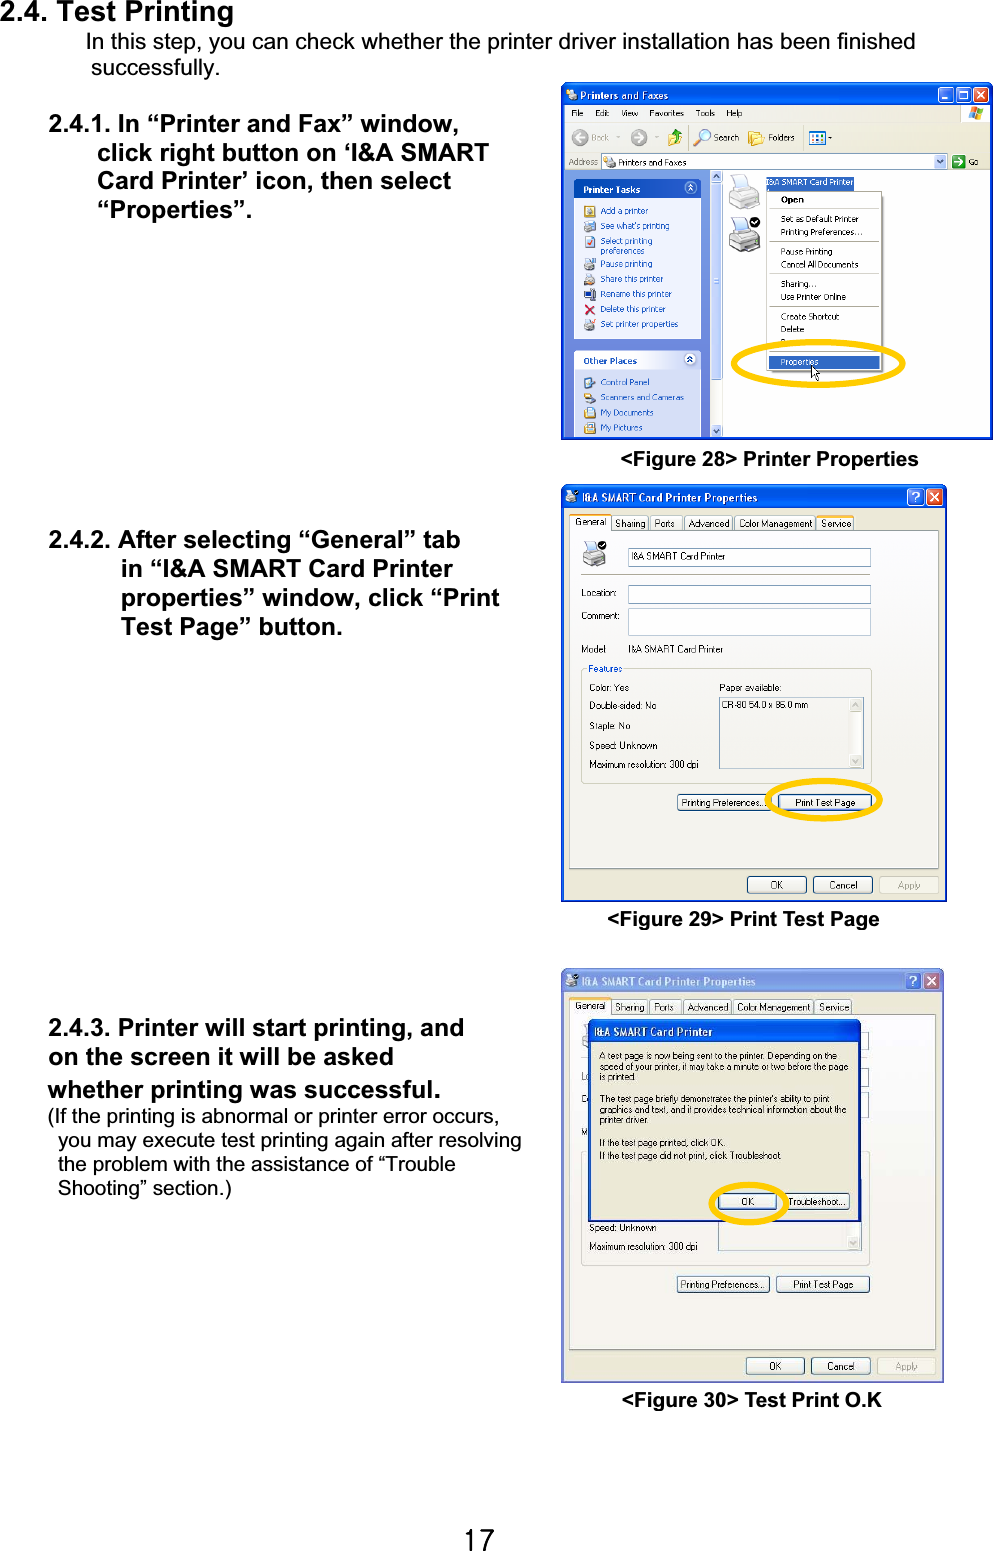 X^G2.4. Test Printing In this step, you can check whether the printer driver installation has been finished   successfully. 2.4.1. In “Printer and Fax” window,   click right button on ‘I&amp;A SMART Card Printer’ icon, then select   “Properties”.2.4.2. After selecting “General” tab   in “I&amp;A SMART Card Printer properties” window, click “Print Test Page” button.                                                                      2.4.3. Printer will start printing, and   on the screen it will be asked       whether printing was successful.(If the printing is abnormal or printer error occurs,   you may execute test printing again after resolving the problem with the assistance of “Trouble Shooting” section.)&lt;Figure 28&gt; Printer Properties&lt;Figure 29&gt; Print Test Page&lt;Figure 30&gt; Test Print O.K 